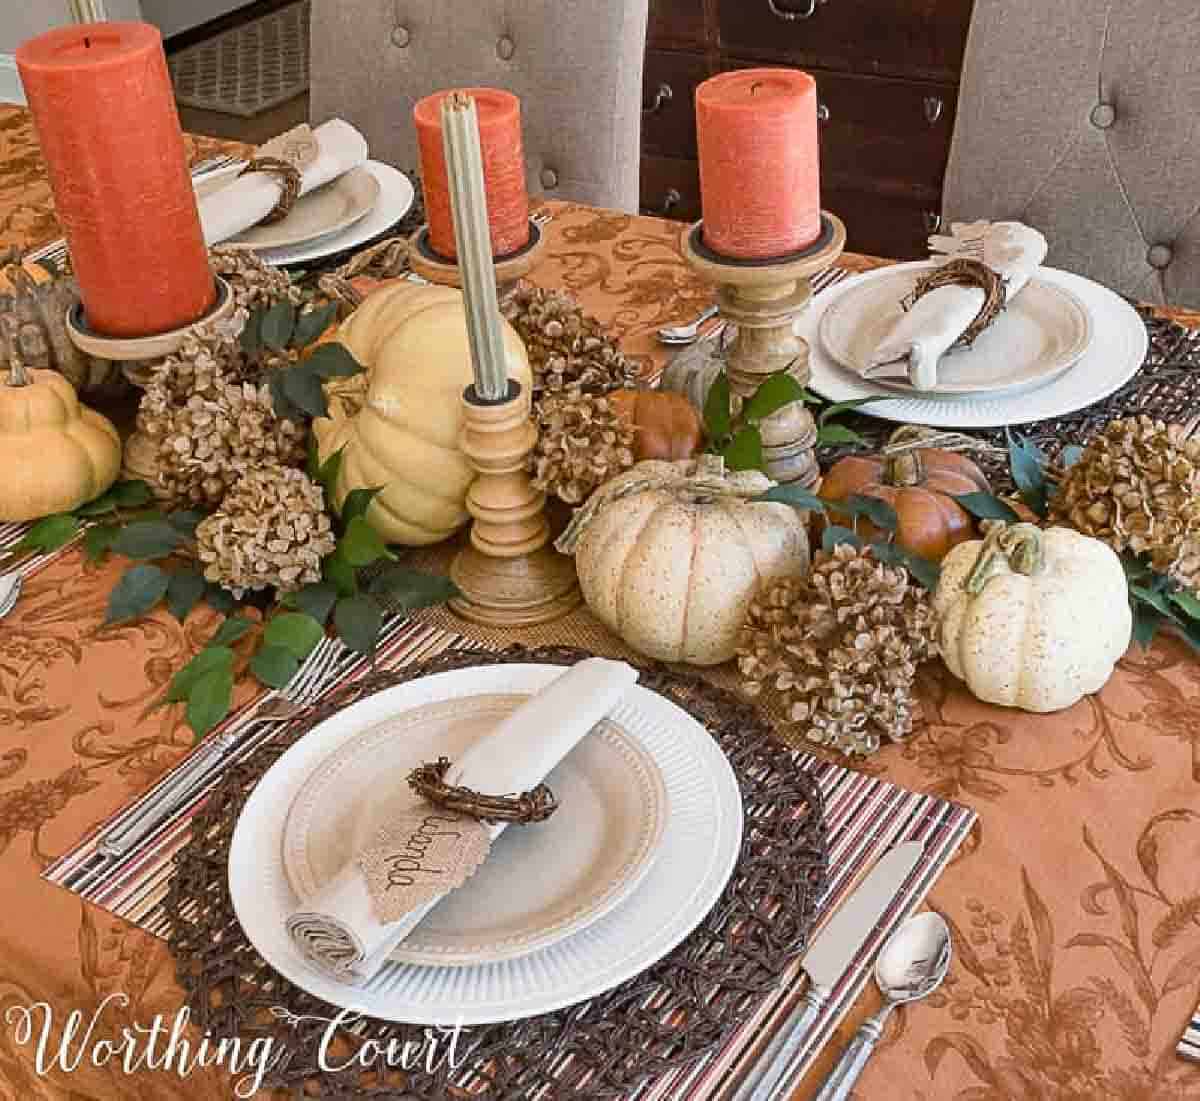 Thanksgiving table setting with pumpkins and hydrangeas in the centerpiece